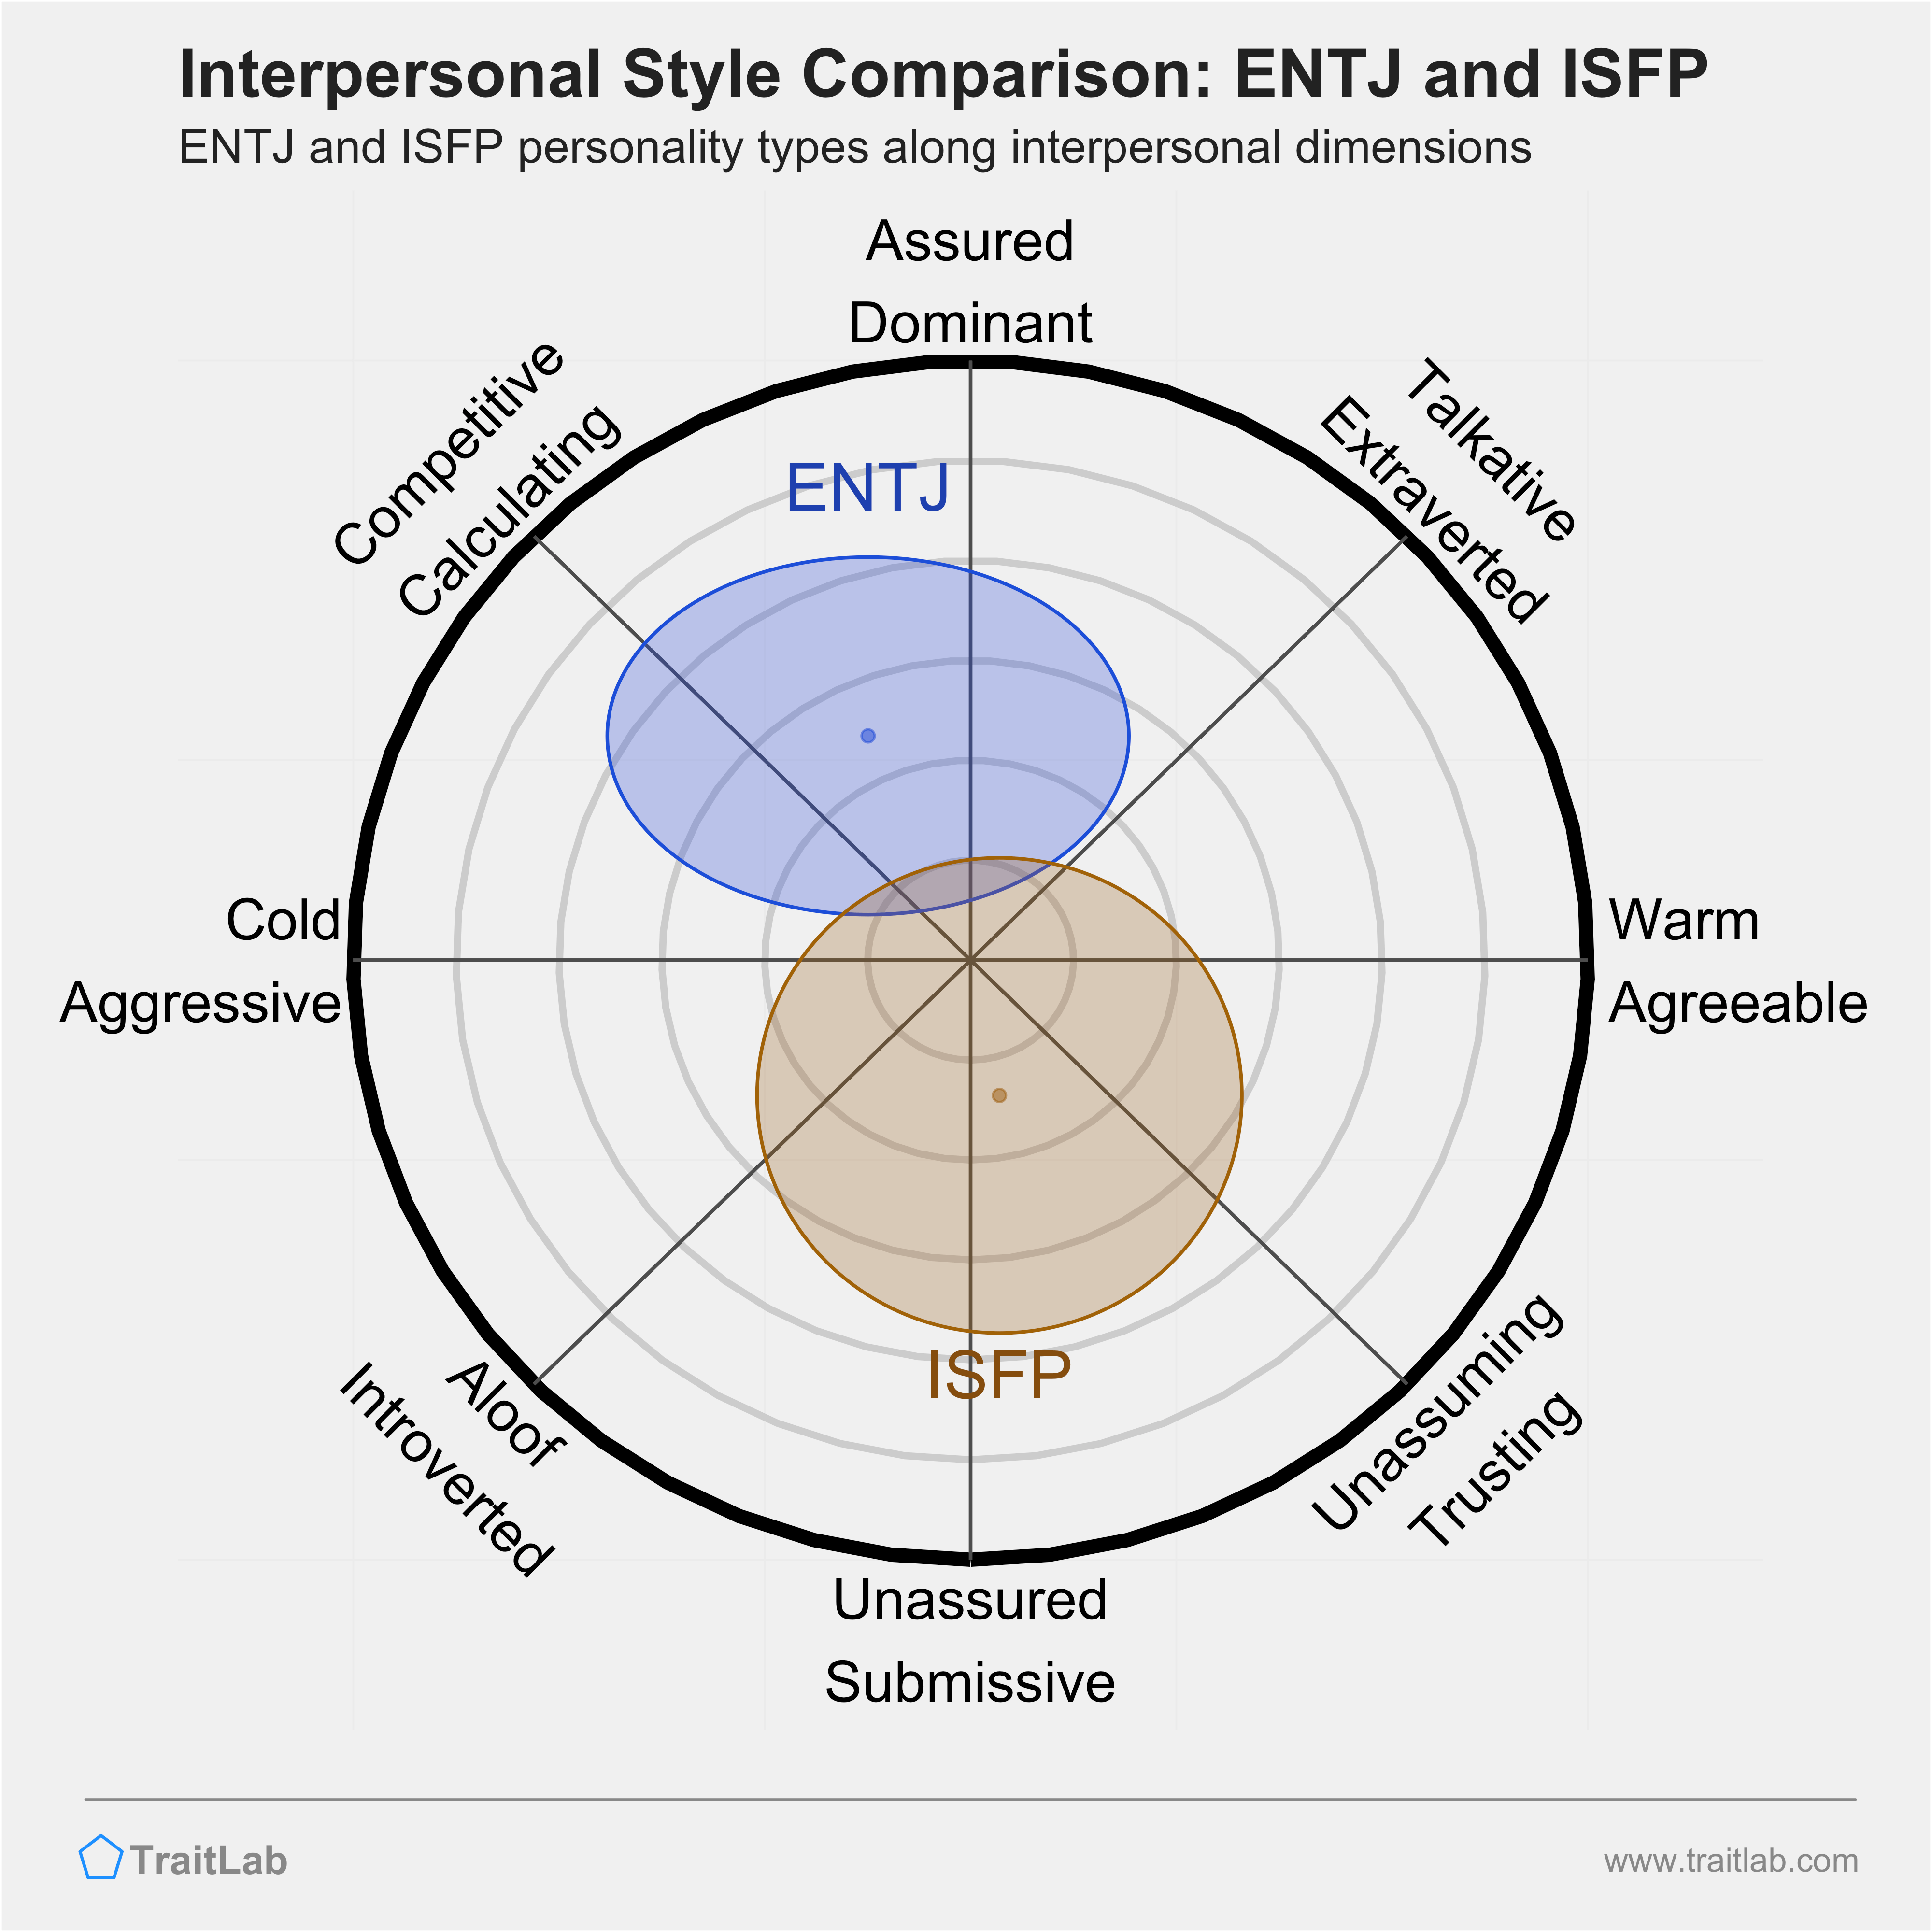 ENTJ and ISFP comparison across interpersonal dimensions